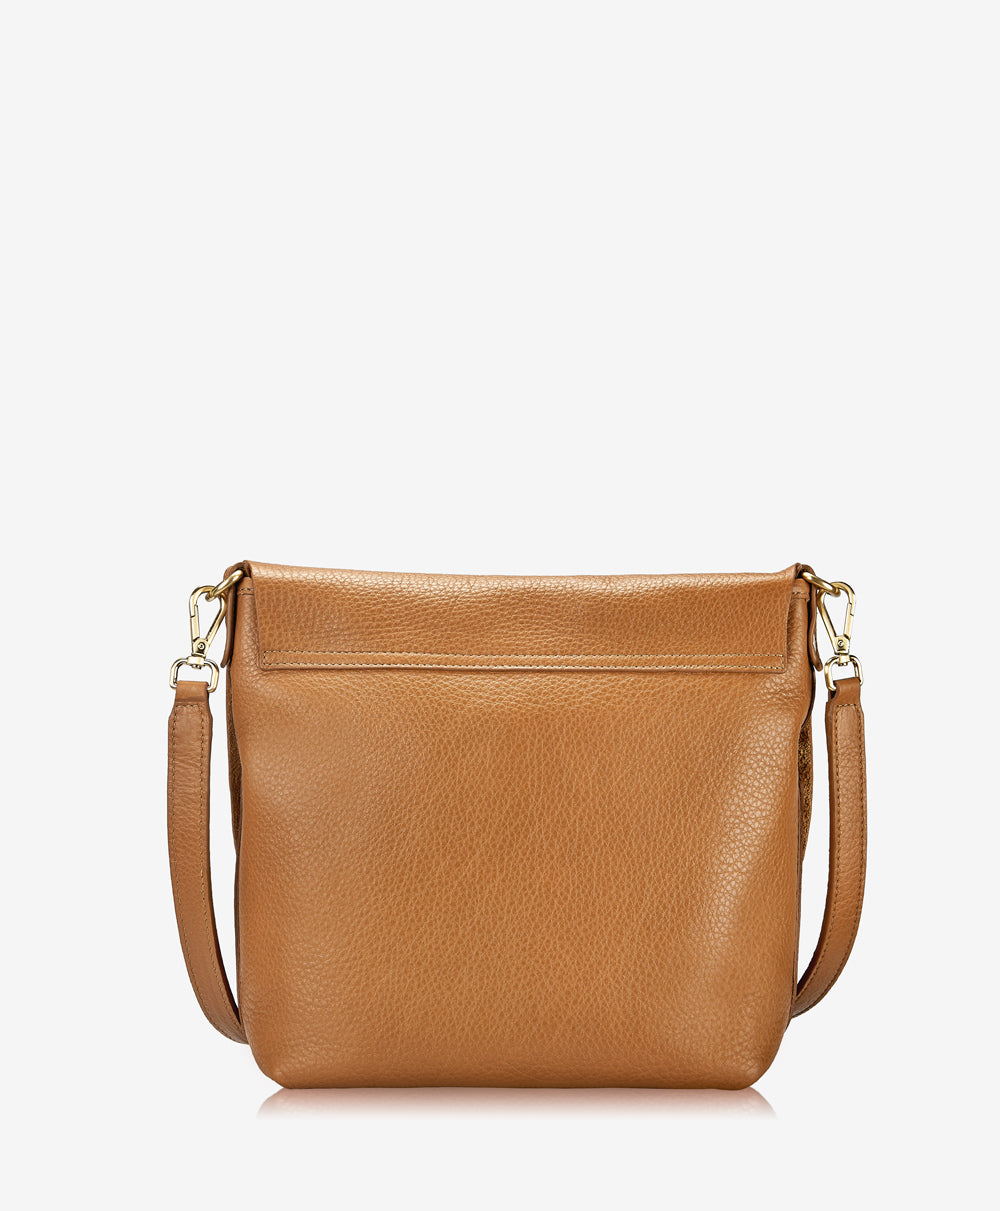 Lux Leather Cross Body Bag